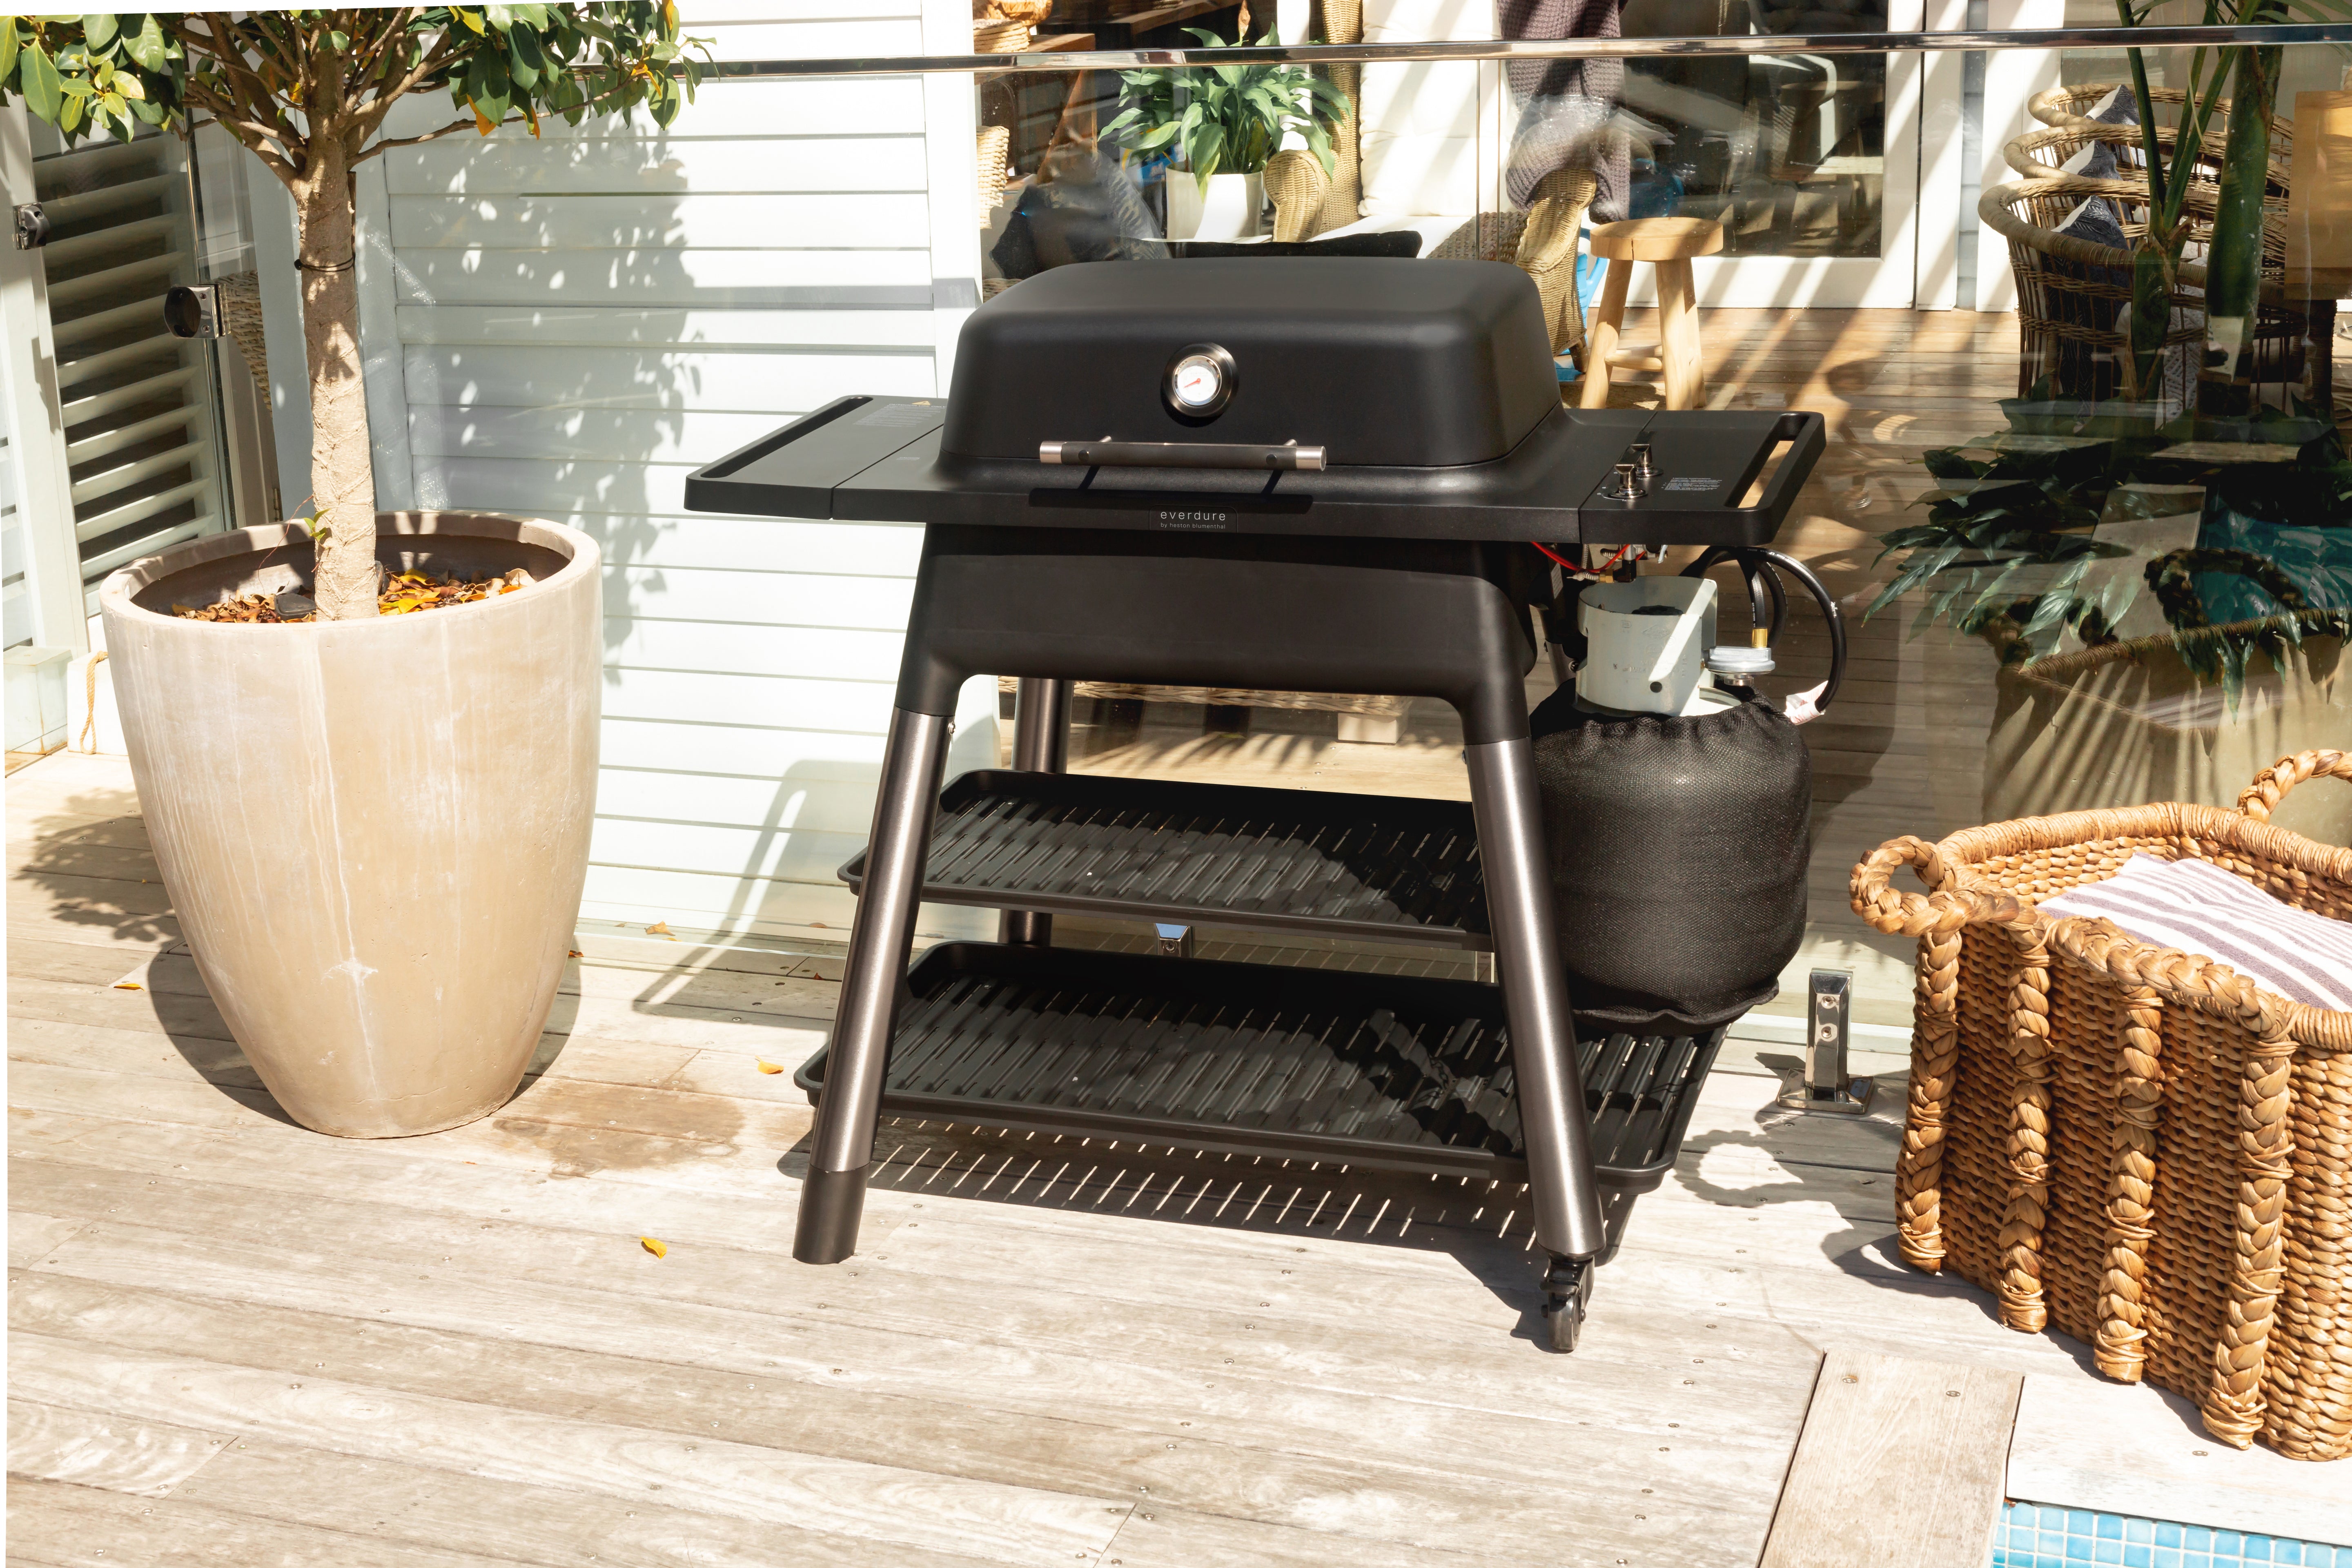 Everdure Force 2 Burner Gas Grill and Cart